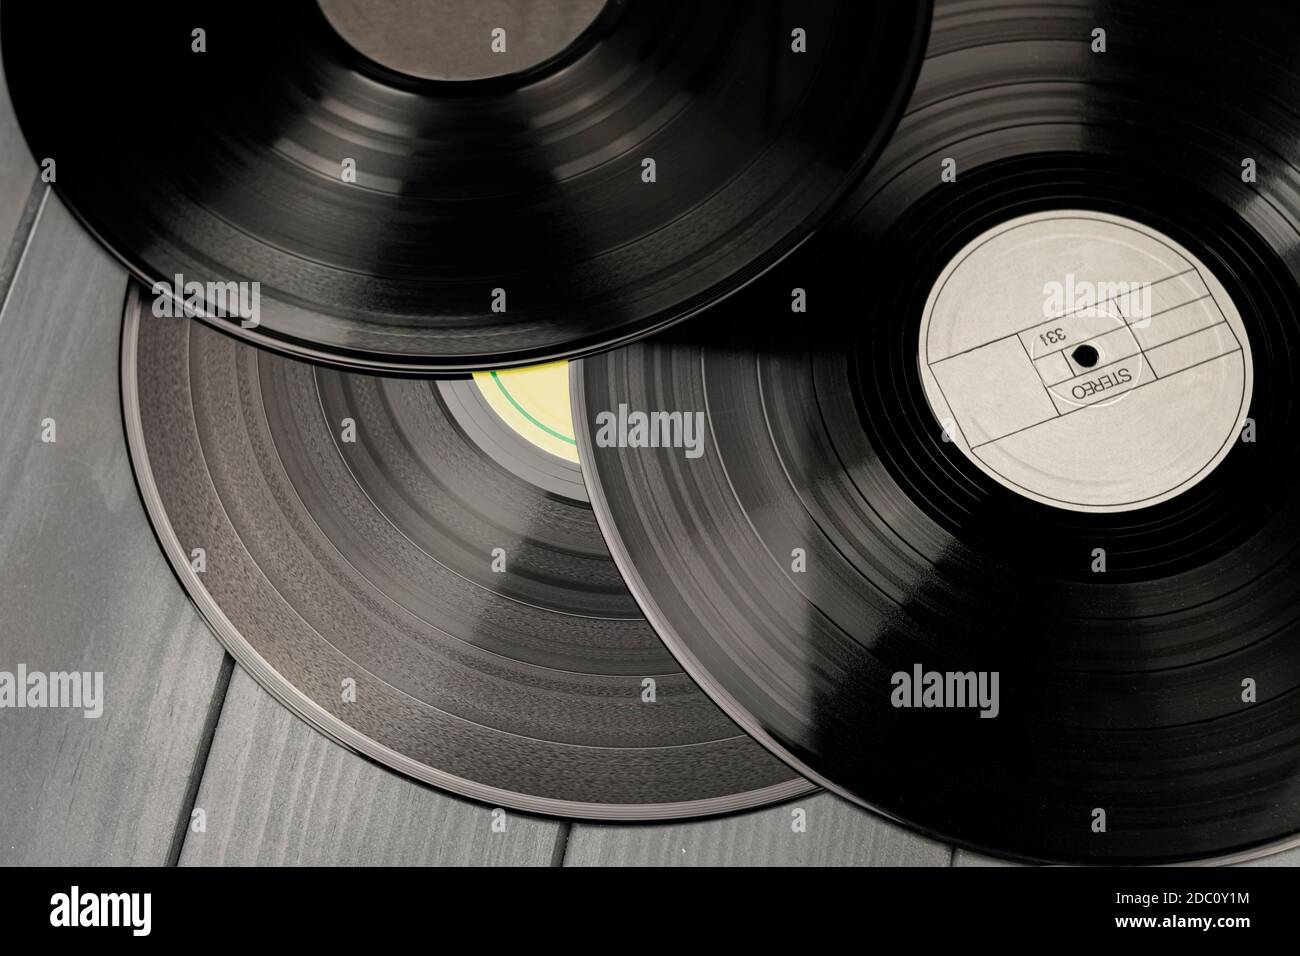 Traditional vinyl records for turntable playback Stock Photo